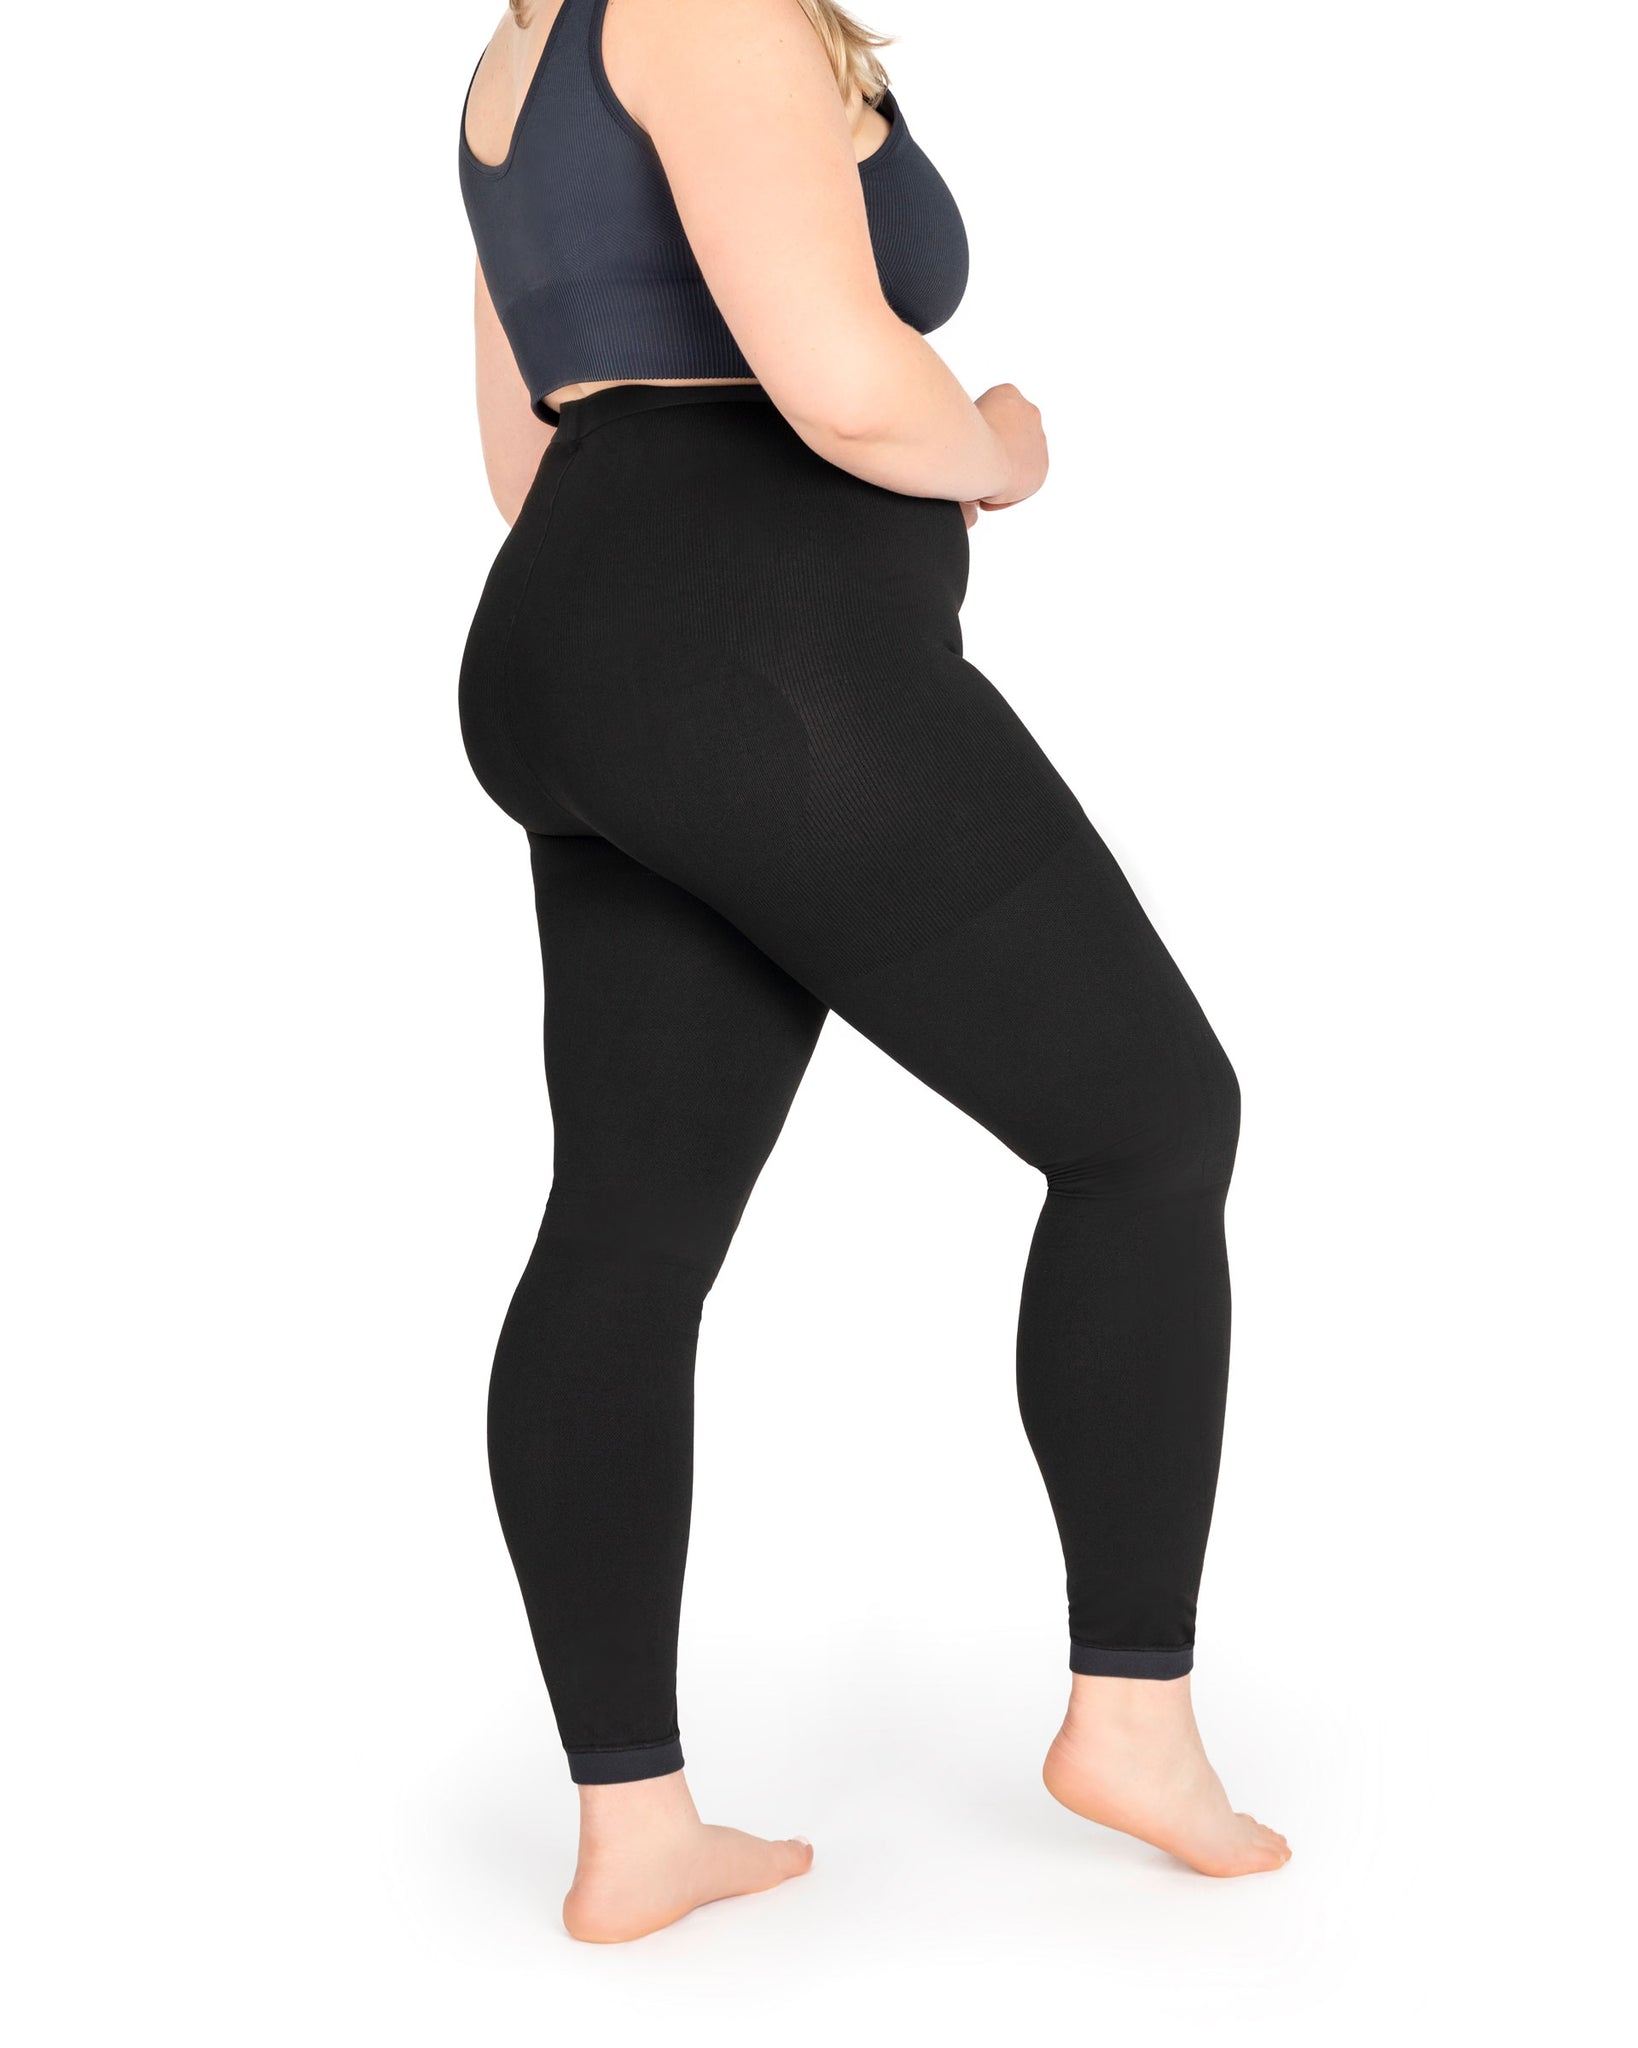 Is it really healthier to sleep in compression sleeping leggings